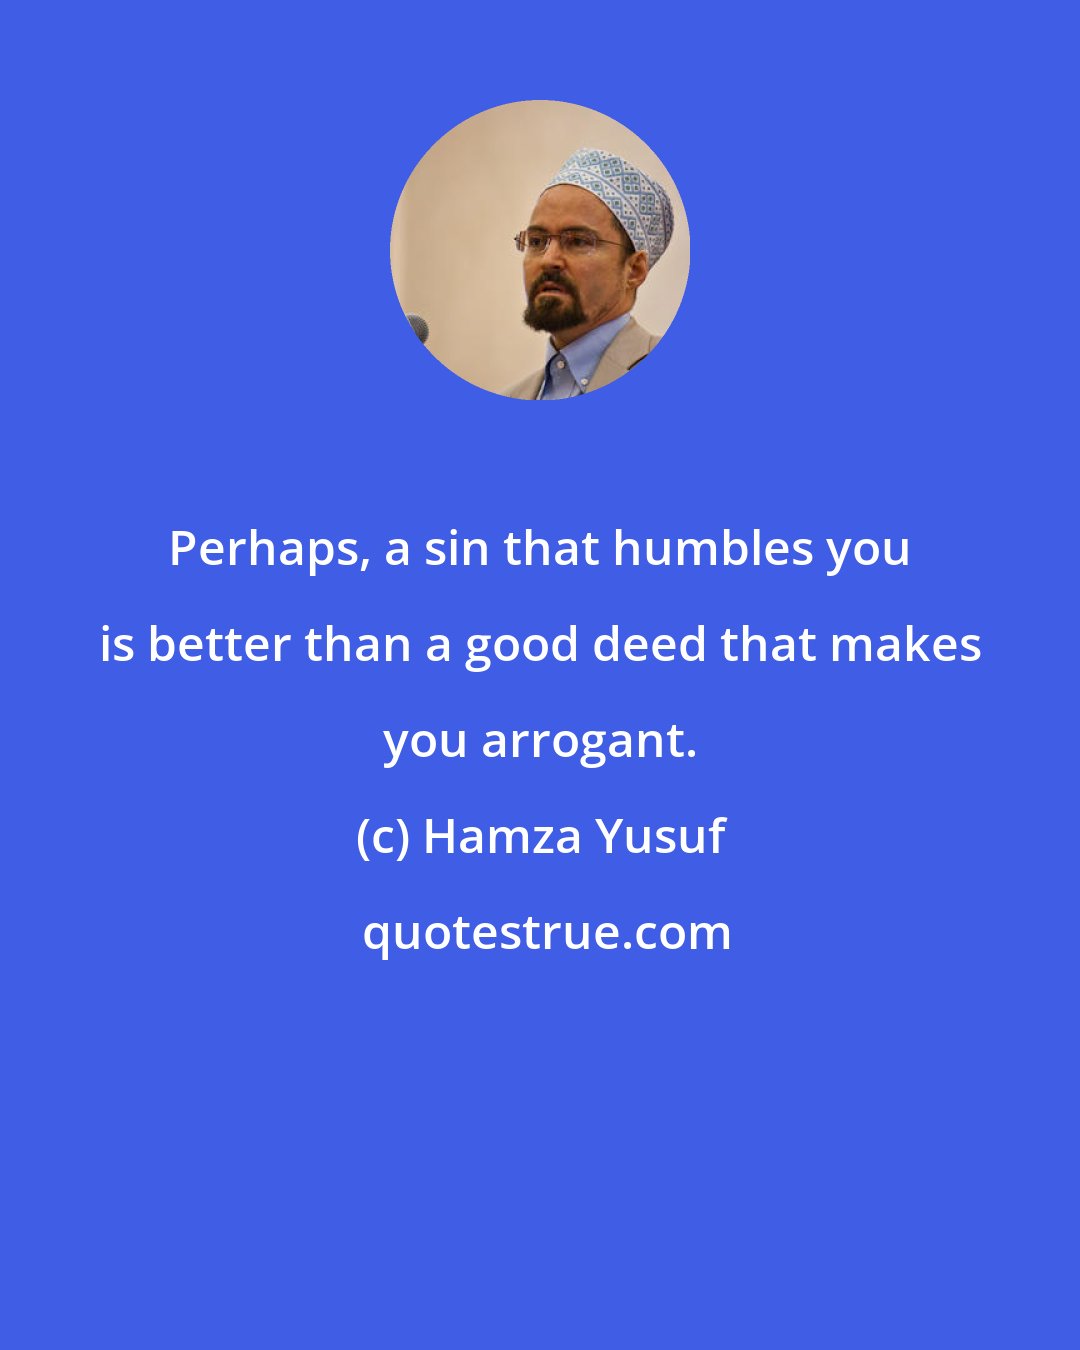 Hamza Yusuf: Perhaps, a sin that humbles you is better than a good deed that makes you arrogant.